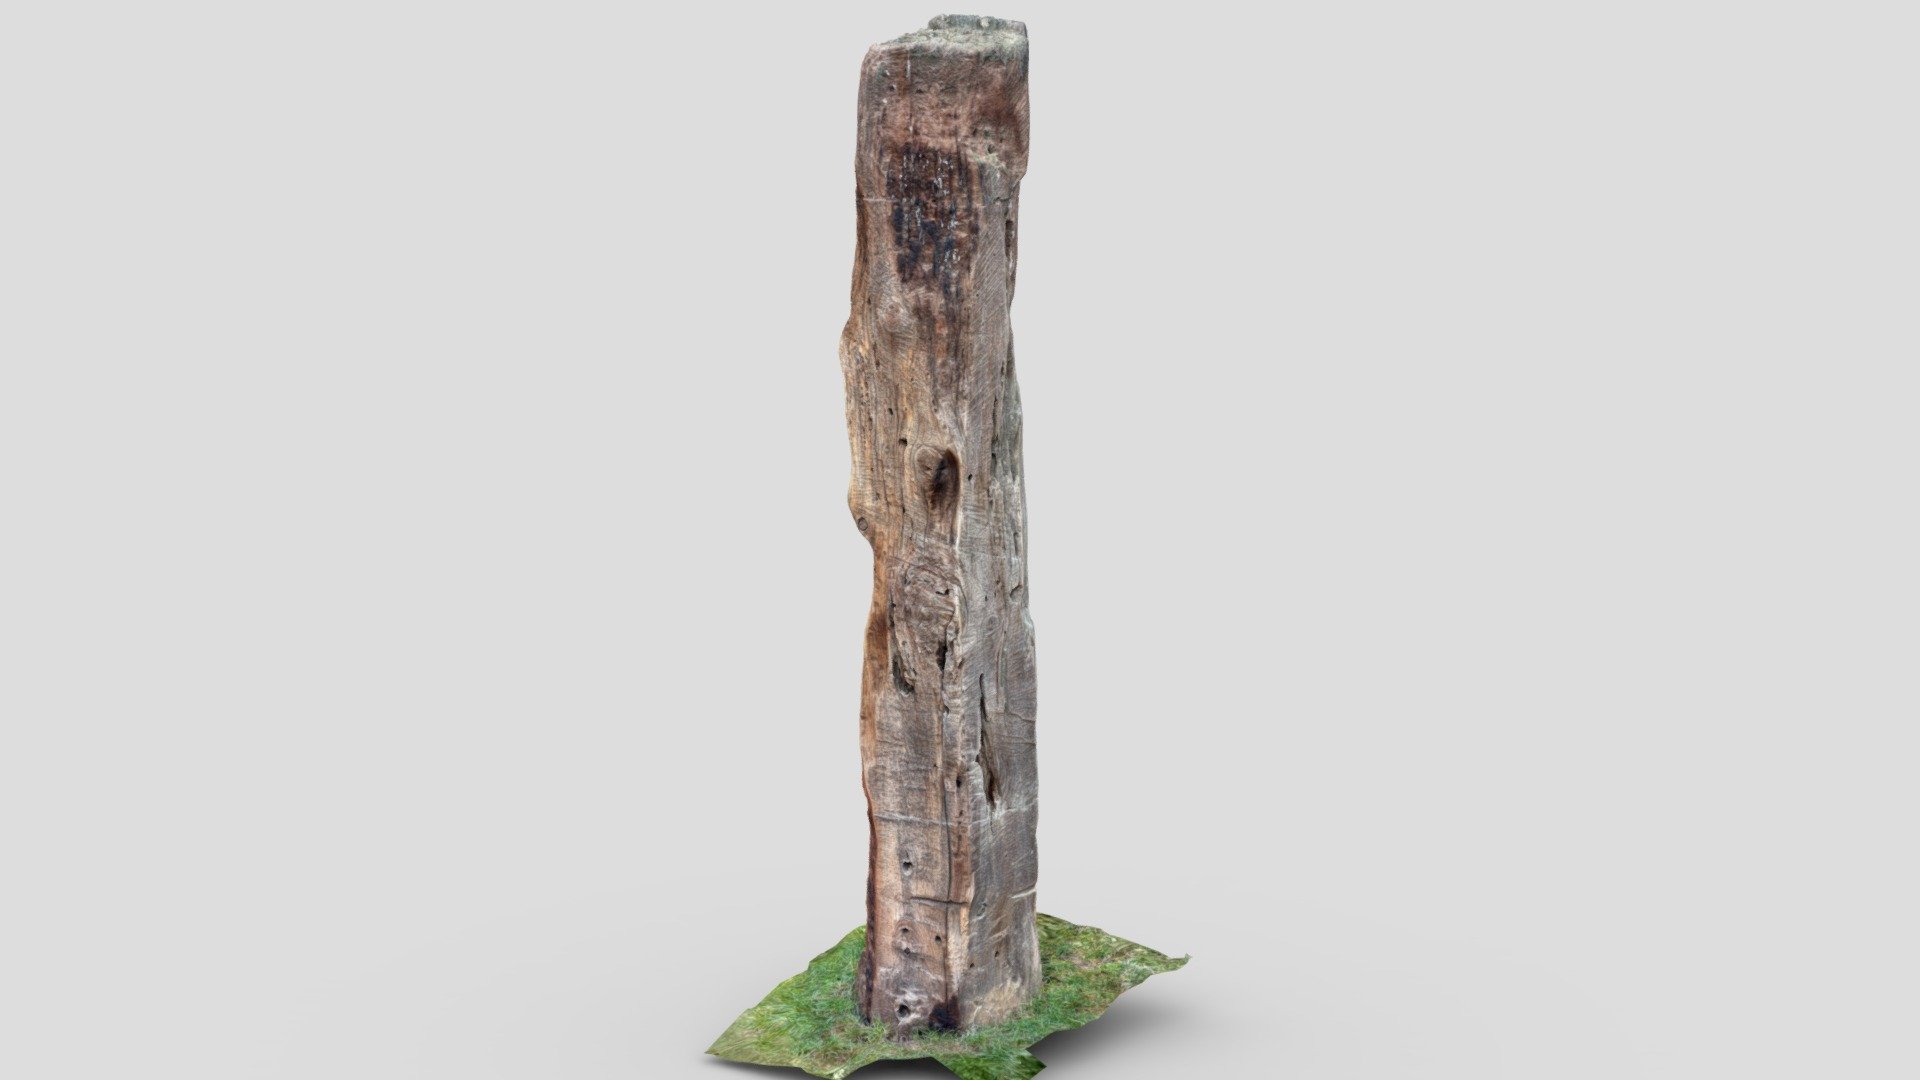 An old railway sleeper that has been used as a fence post on a barn in rural California. Polycam version. There is a better Trnio Plus - generated version on my ArtStation 3d model